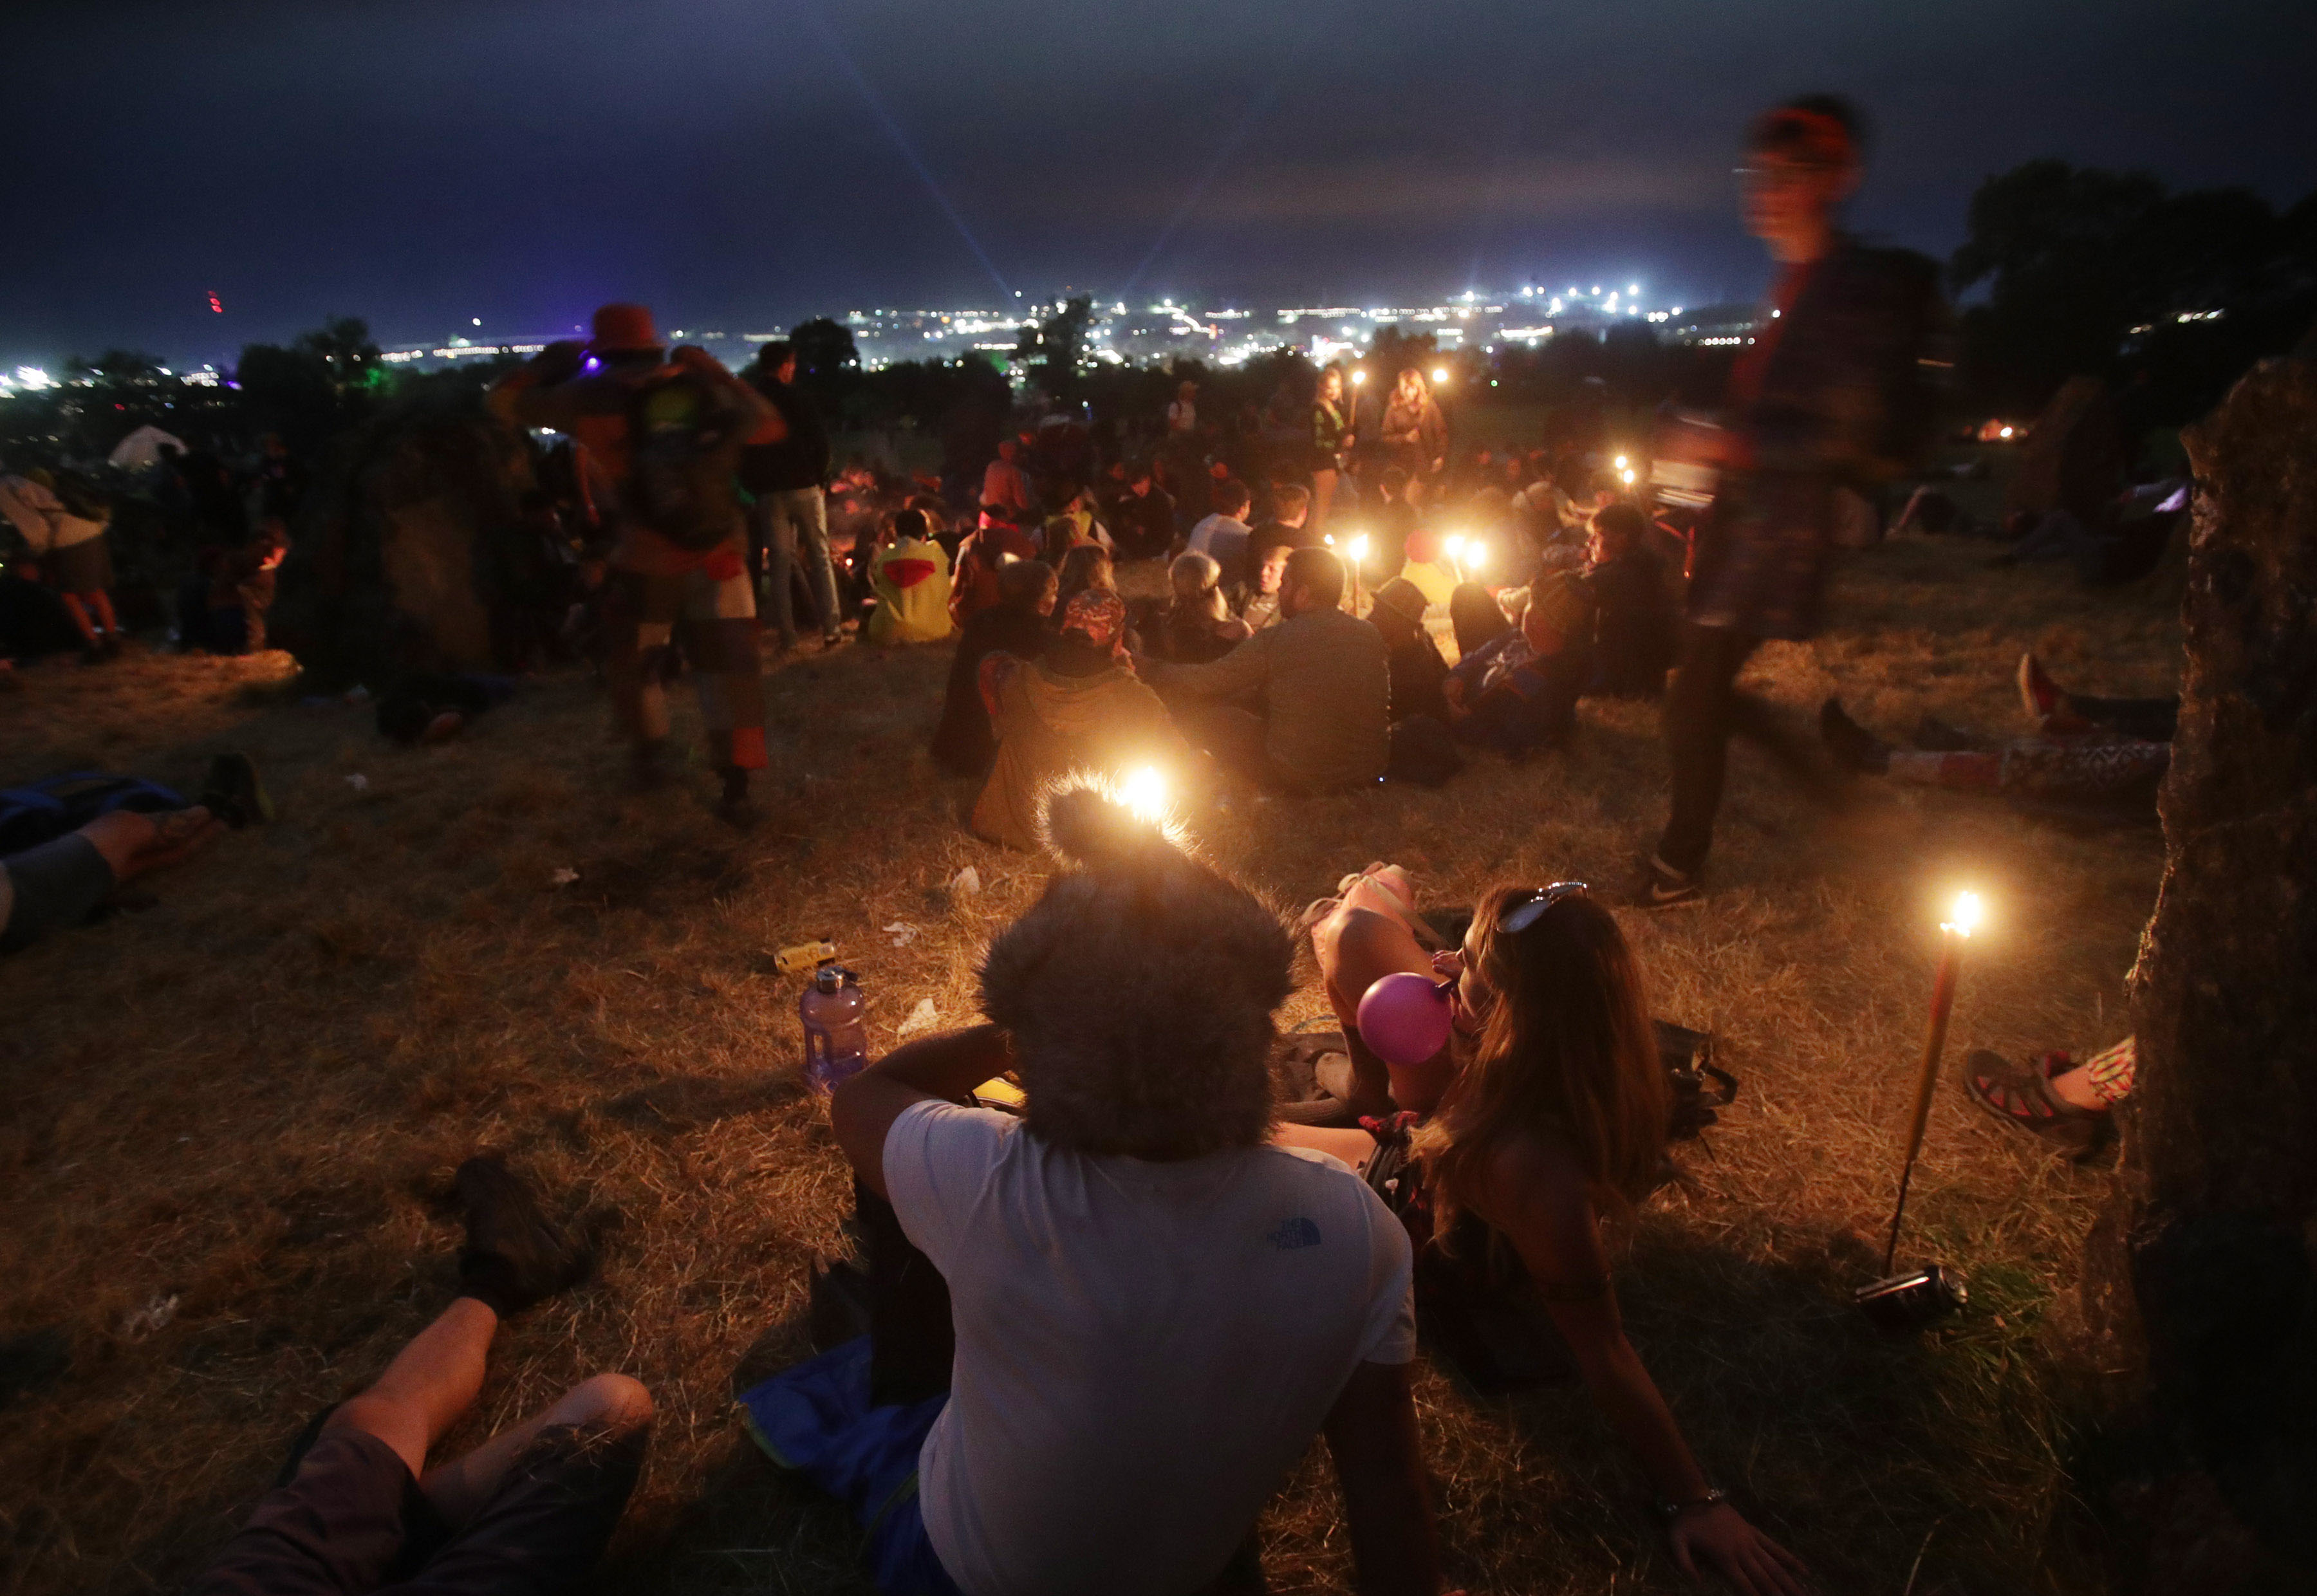 Festival goers at the Stone Circle in the early hours of the morning, at the Glastonbury Festival at Worthy Farm in Pilton, Somerset.